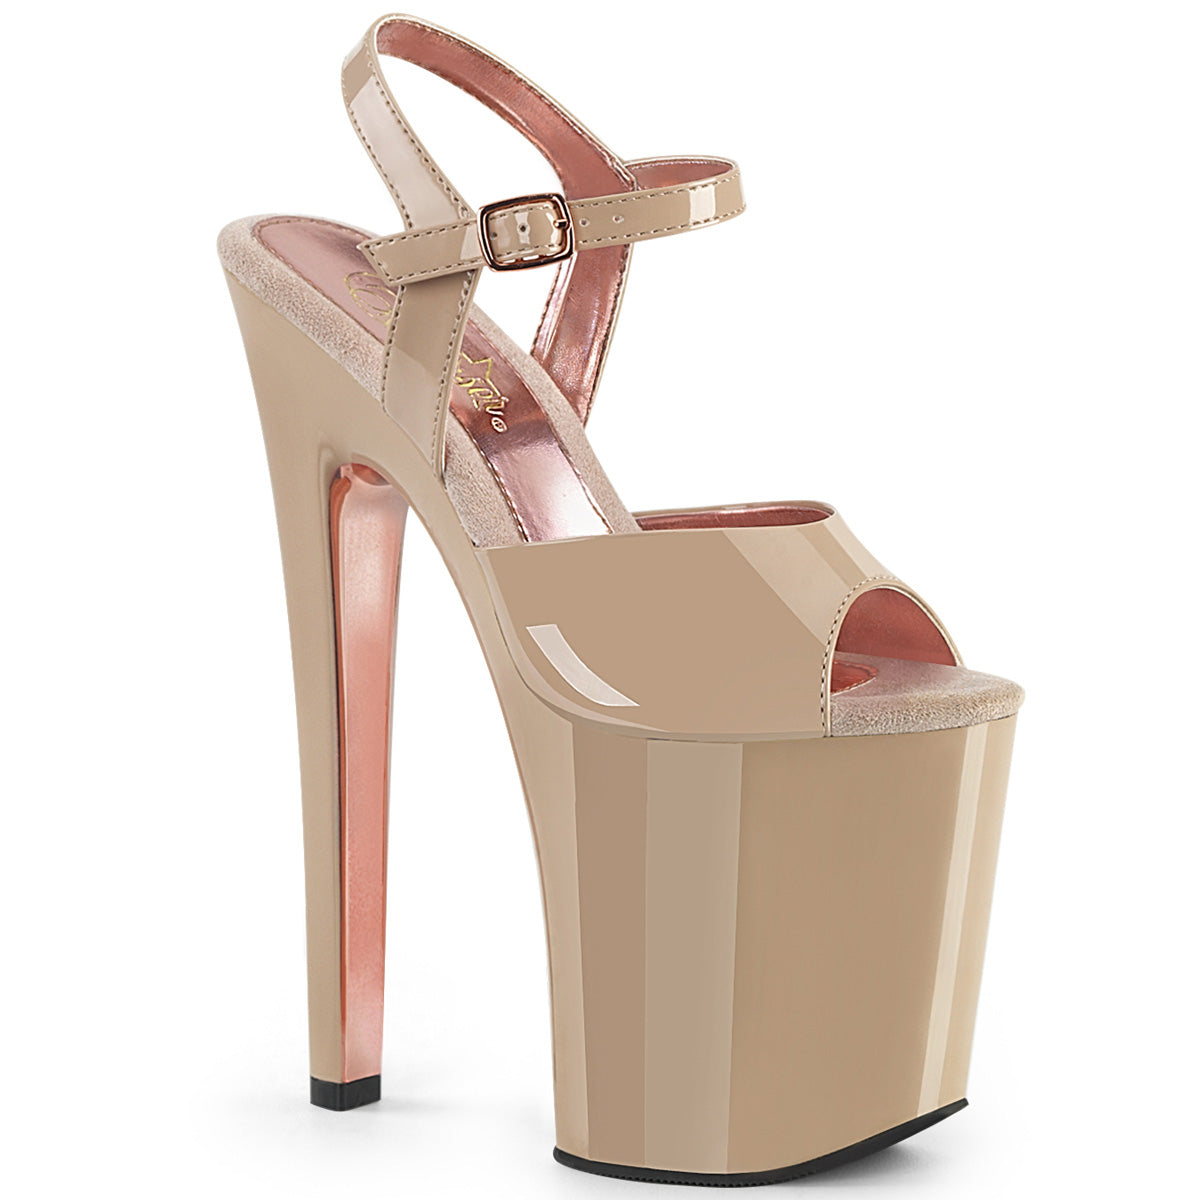 Pleaser Womens Sandals XTREME-809TT Nude Pat/Nude-Rose Gold Chrome